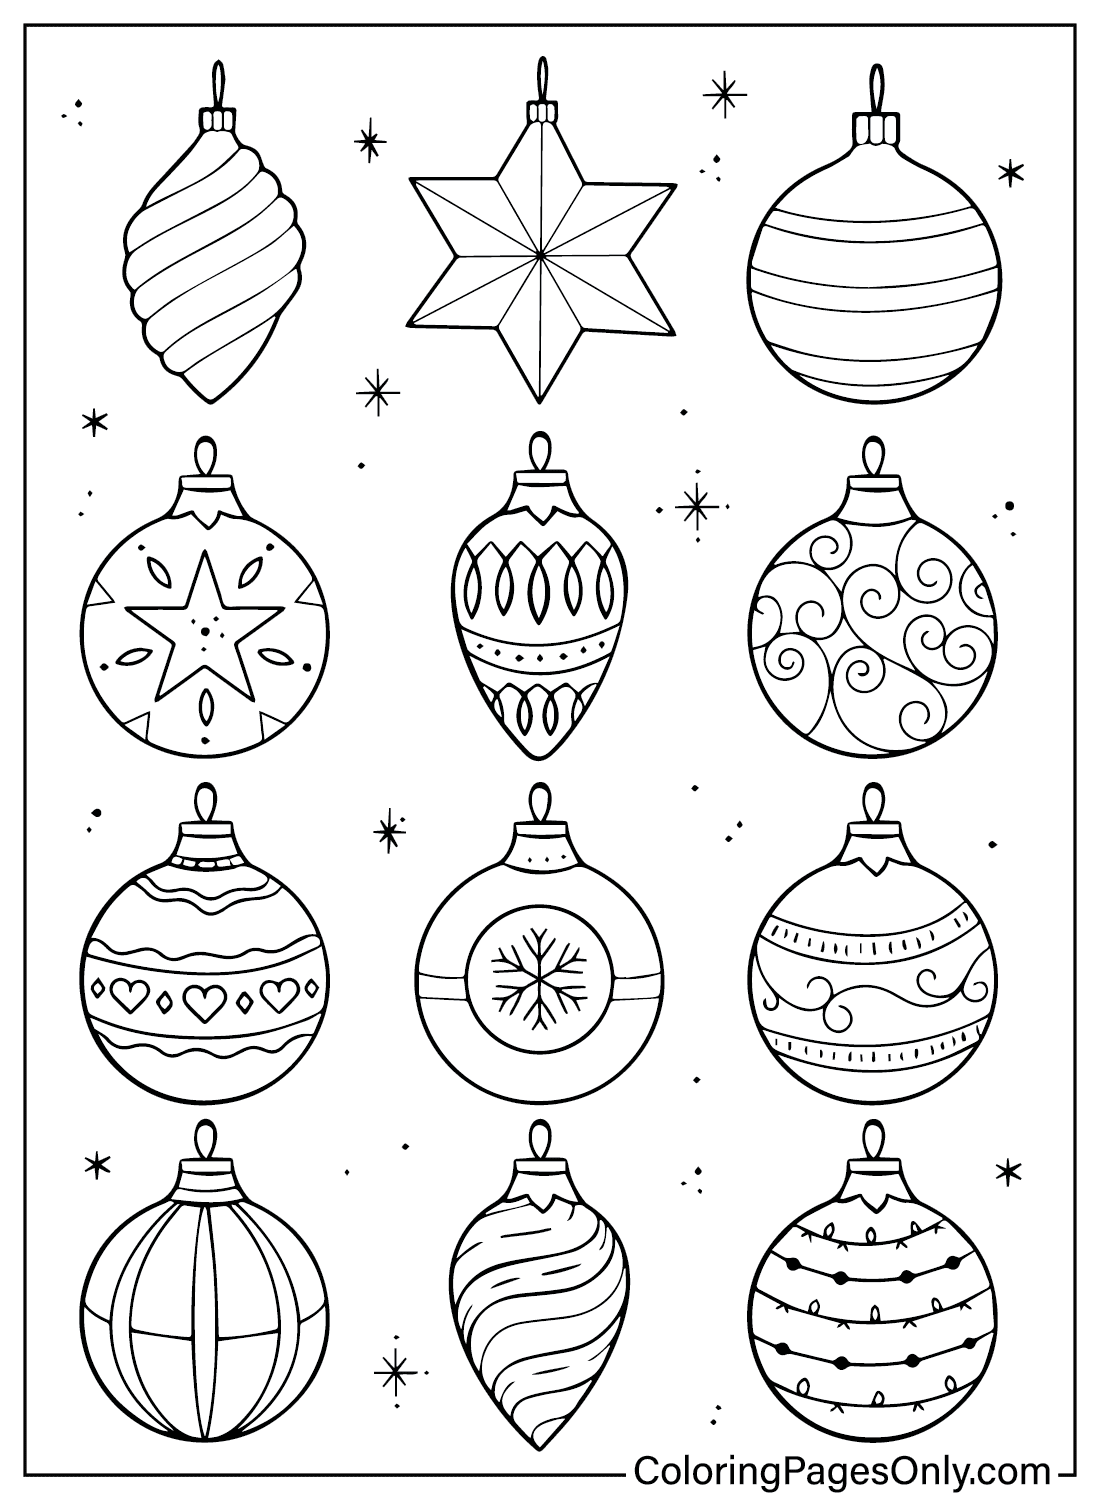 Christmas Coloring Pages Ornaments - Free Printable Coloring Pages